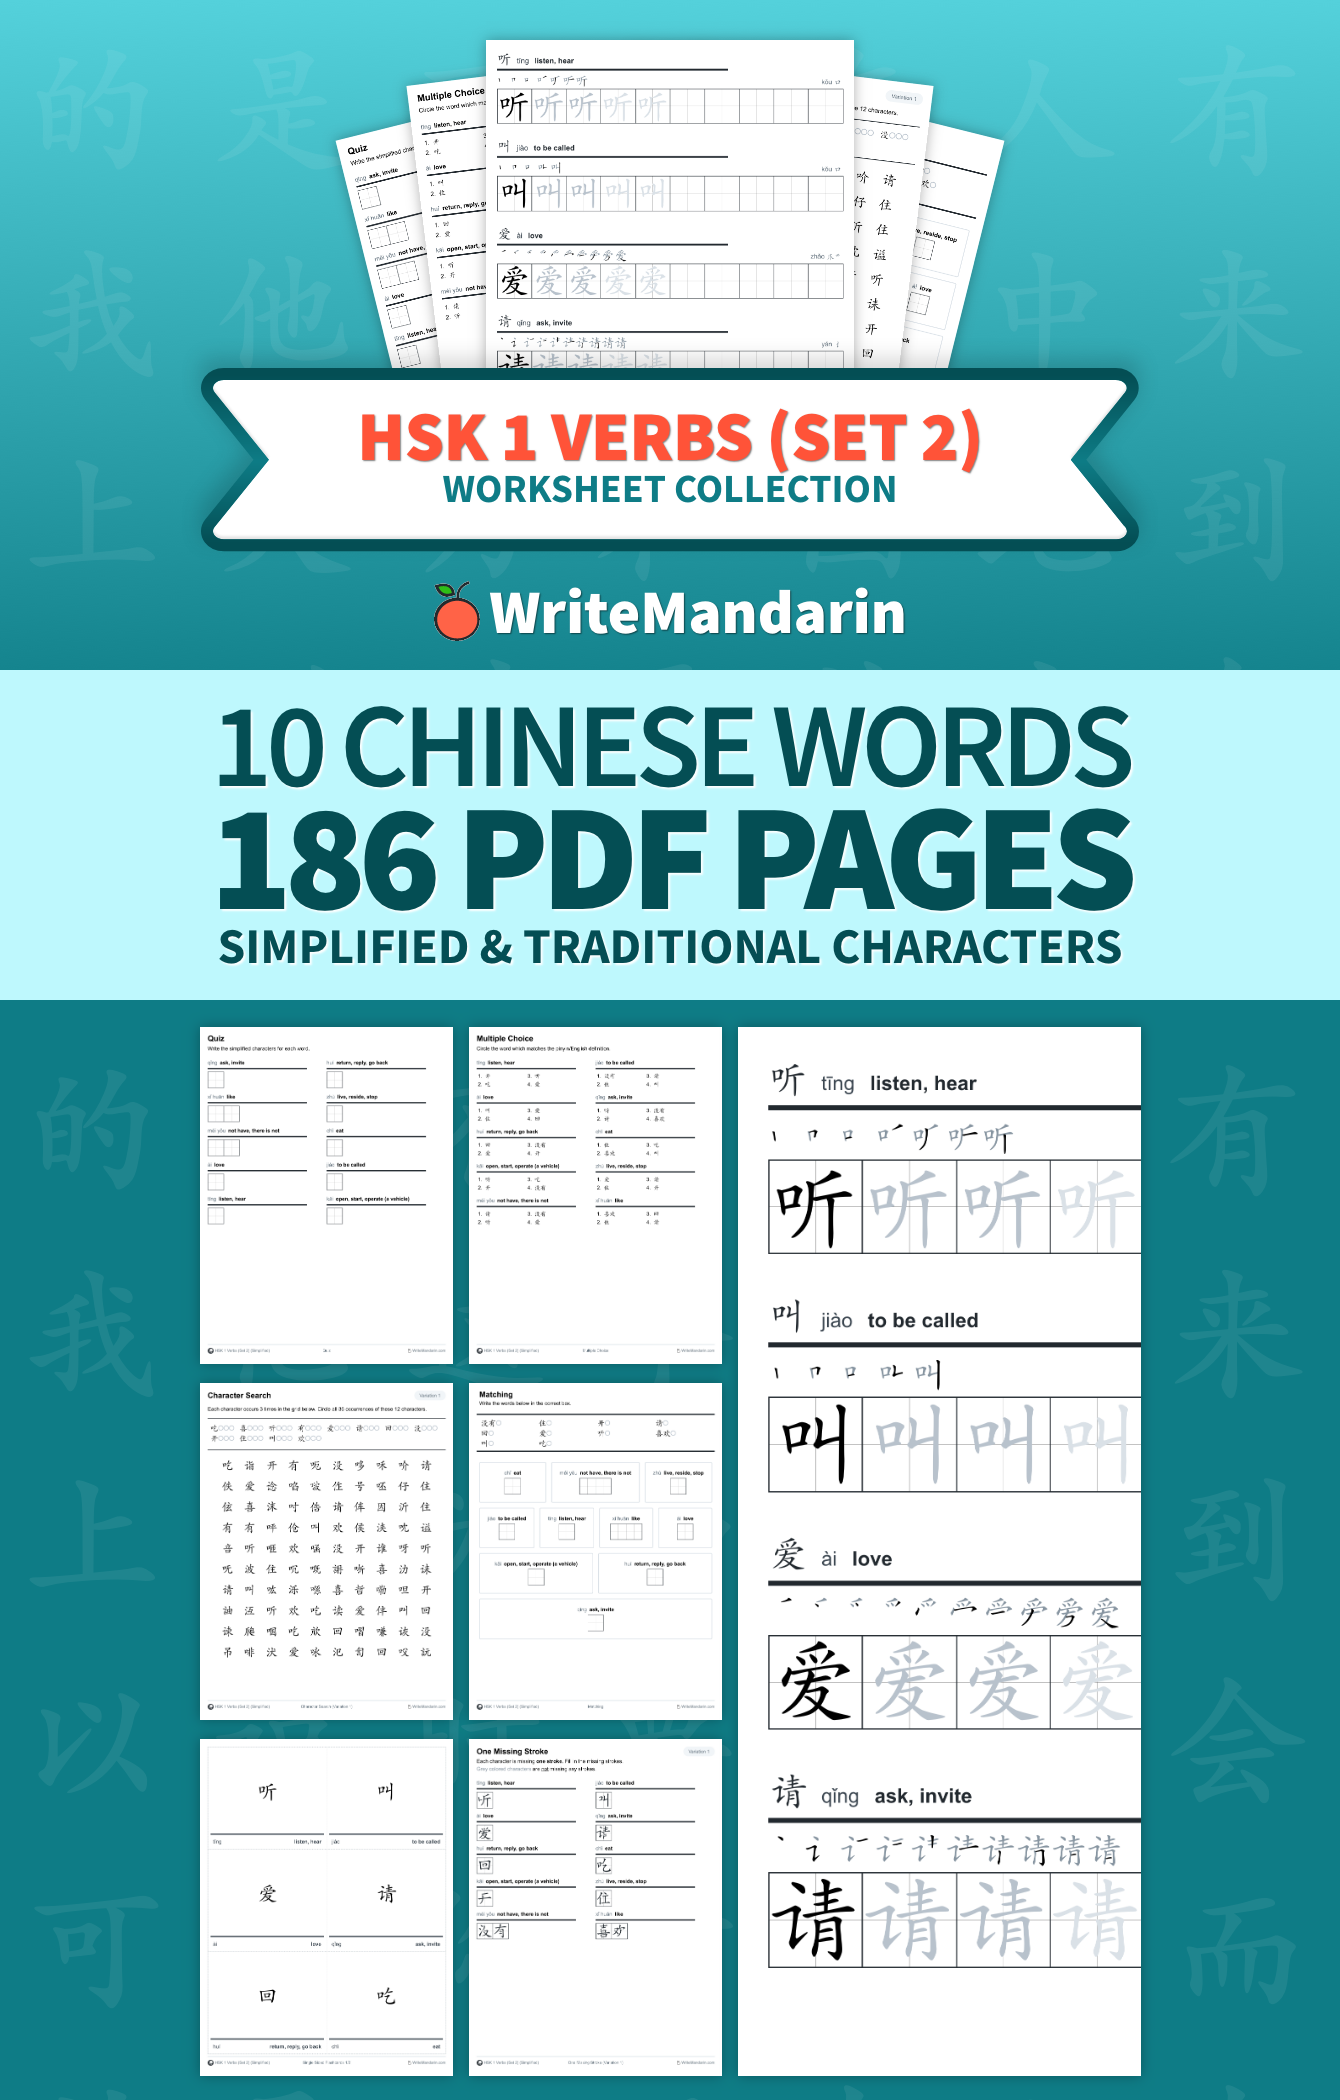 Preview image of HSK 1 Verbs (Set 2) worksheet collection